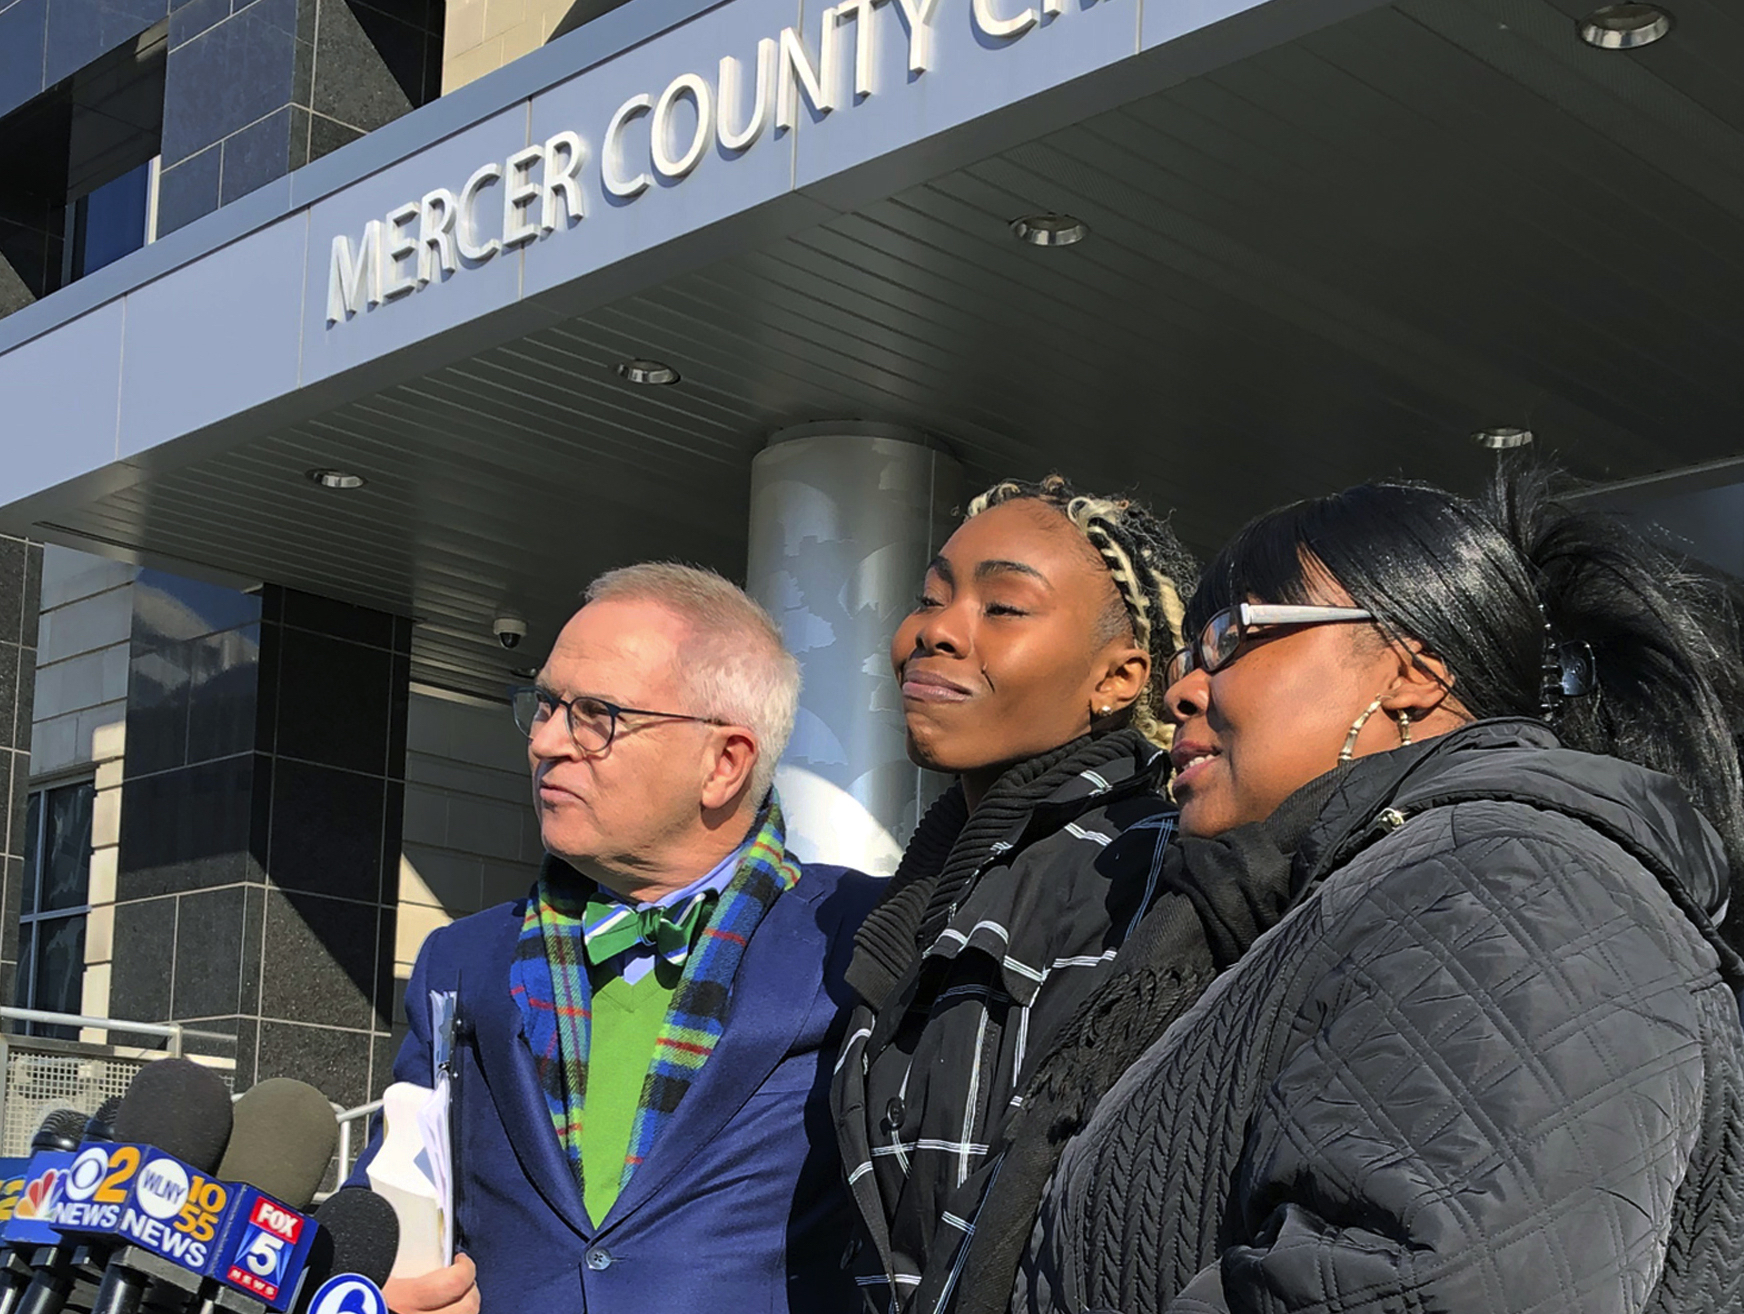 azmine Headley, center, joins attorney Brian Neary and her mother, Jacqueline Jenkins, outside a courthouse in Trenton, N.J., after she accepted a deal to enter a pretrial intervention program related to credit card theft charges she faced, Wednesday, Dec. 12, 2018. Headley said she's happy to be reunited with her son after being violently separated from her toddler by New York police in a widely viewed videotaped encounter. (AP Photo/Mike Catalini)